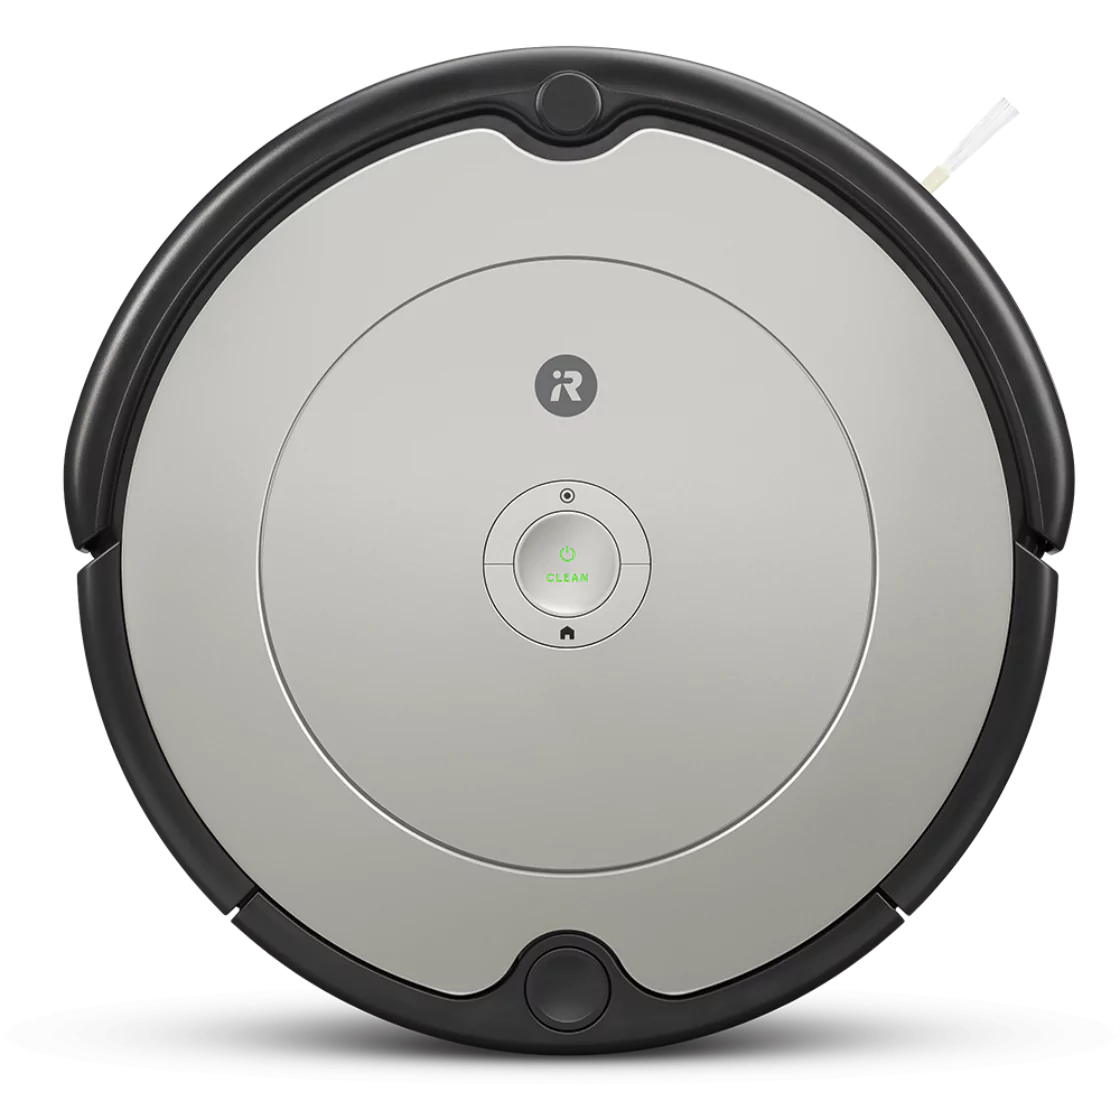 iRobot Roomba 698 that is going to be integrated with Home Assistant